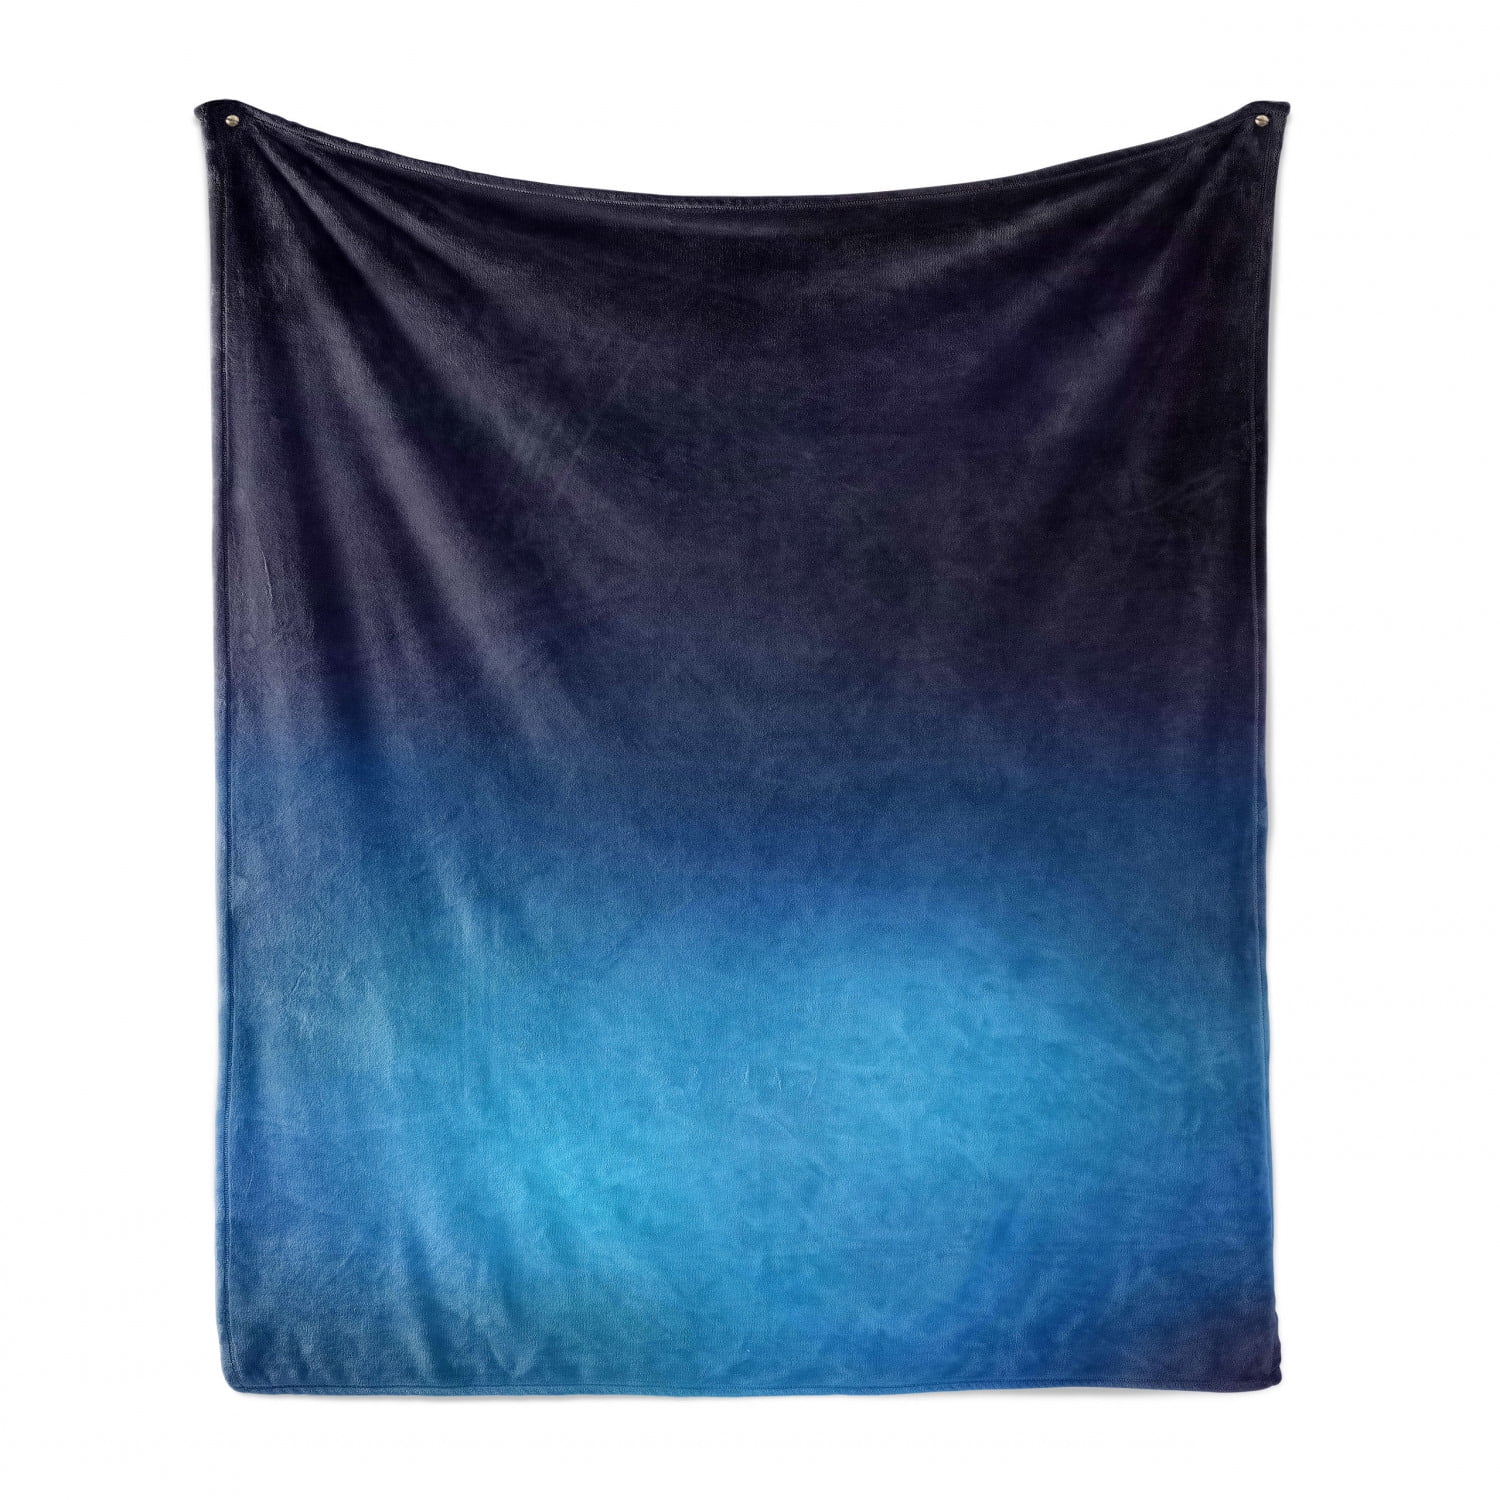 Ombre Style Deep Sea Ocean Underwater Themed Digital Colored Graphic Design Art Print Dark Blue 50 x 70 Ambesonne Navy Soft Flannel Fleece Throw Blanket Cozy Plush for Indoor and Outdoor Use